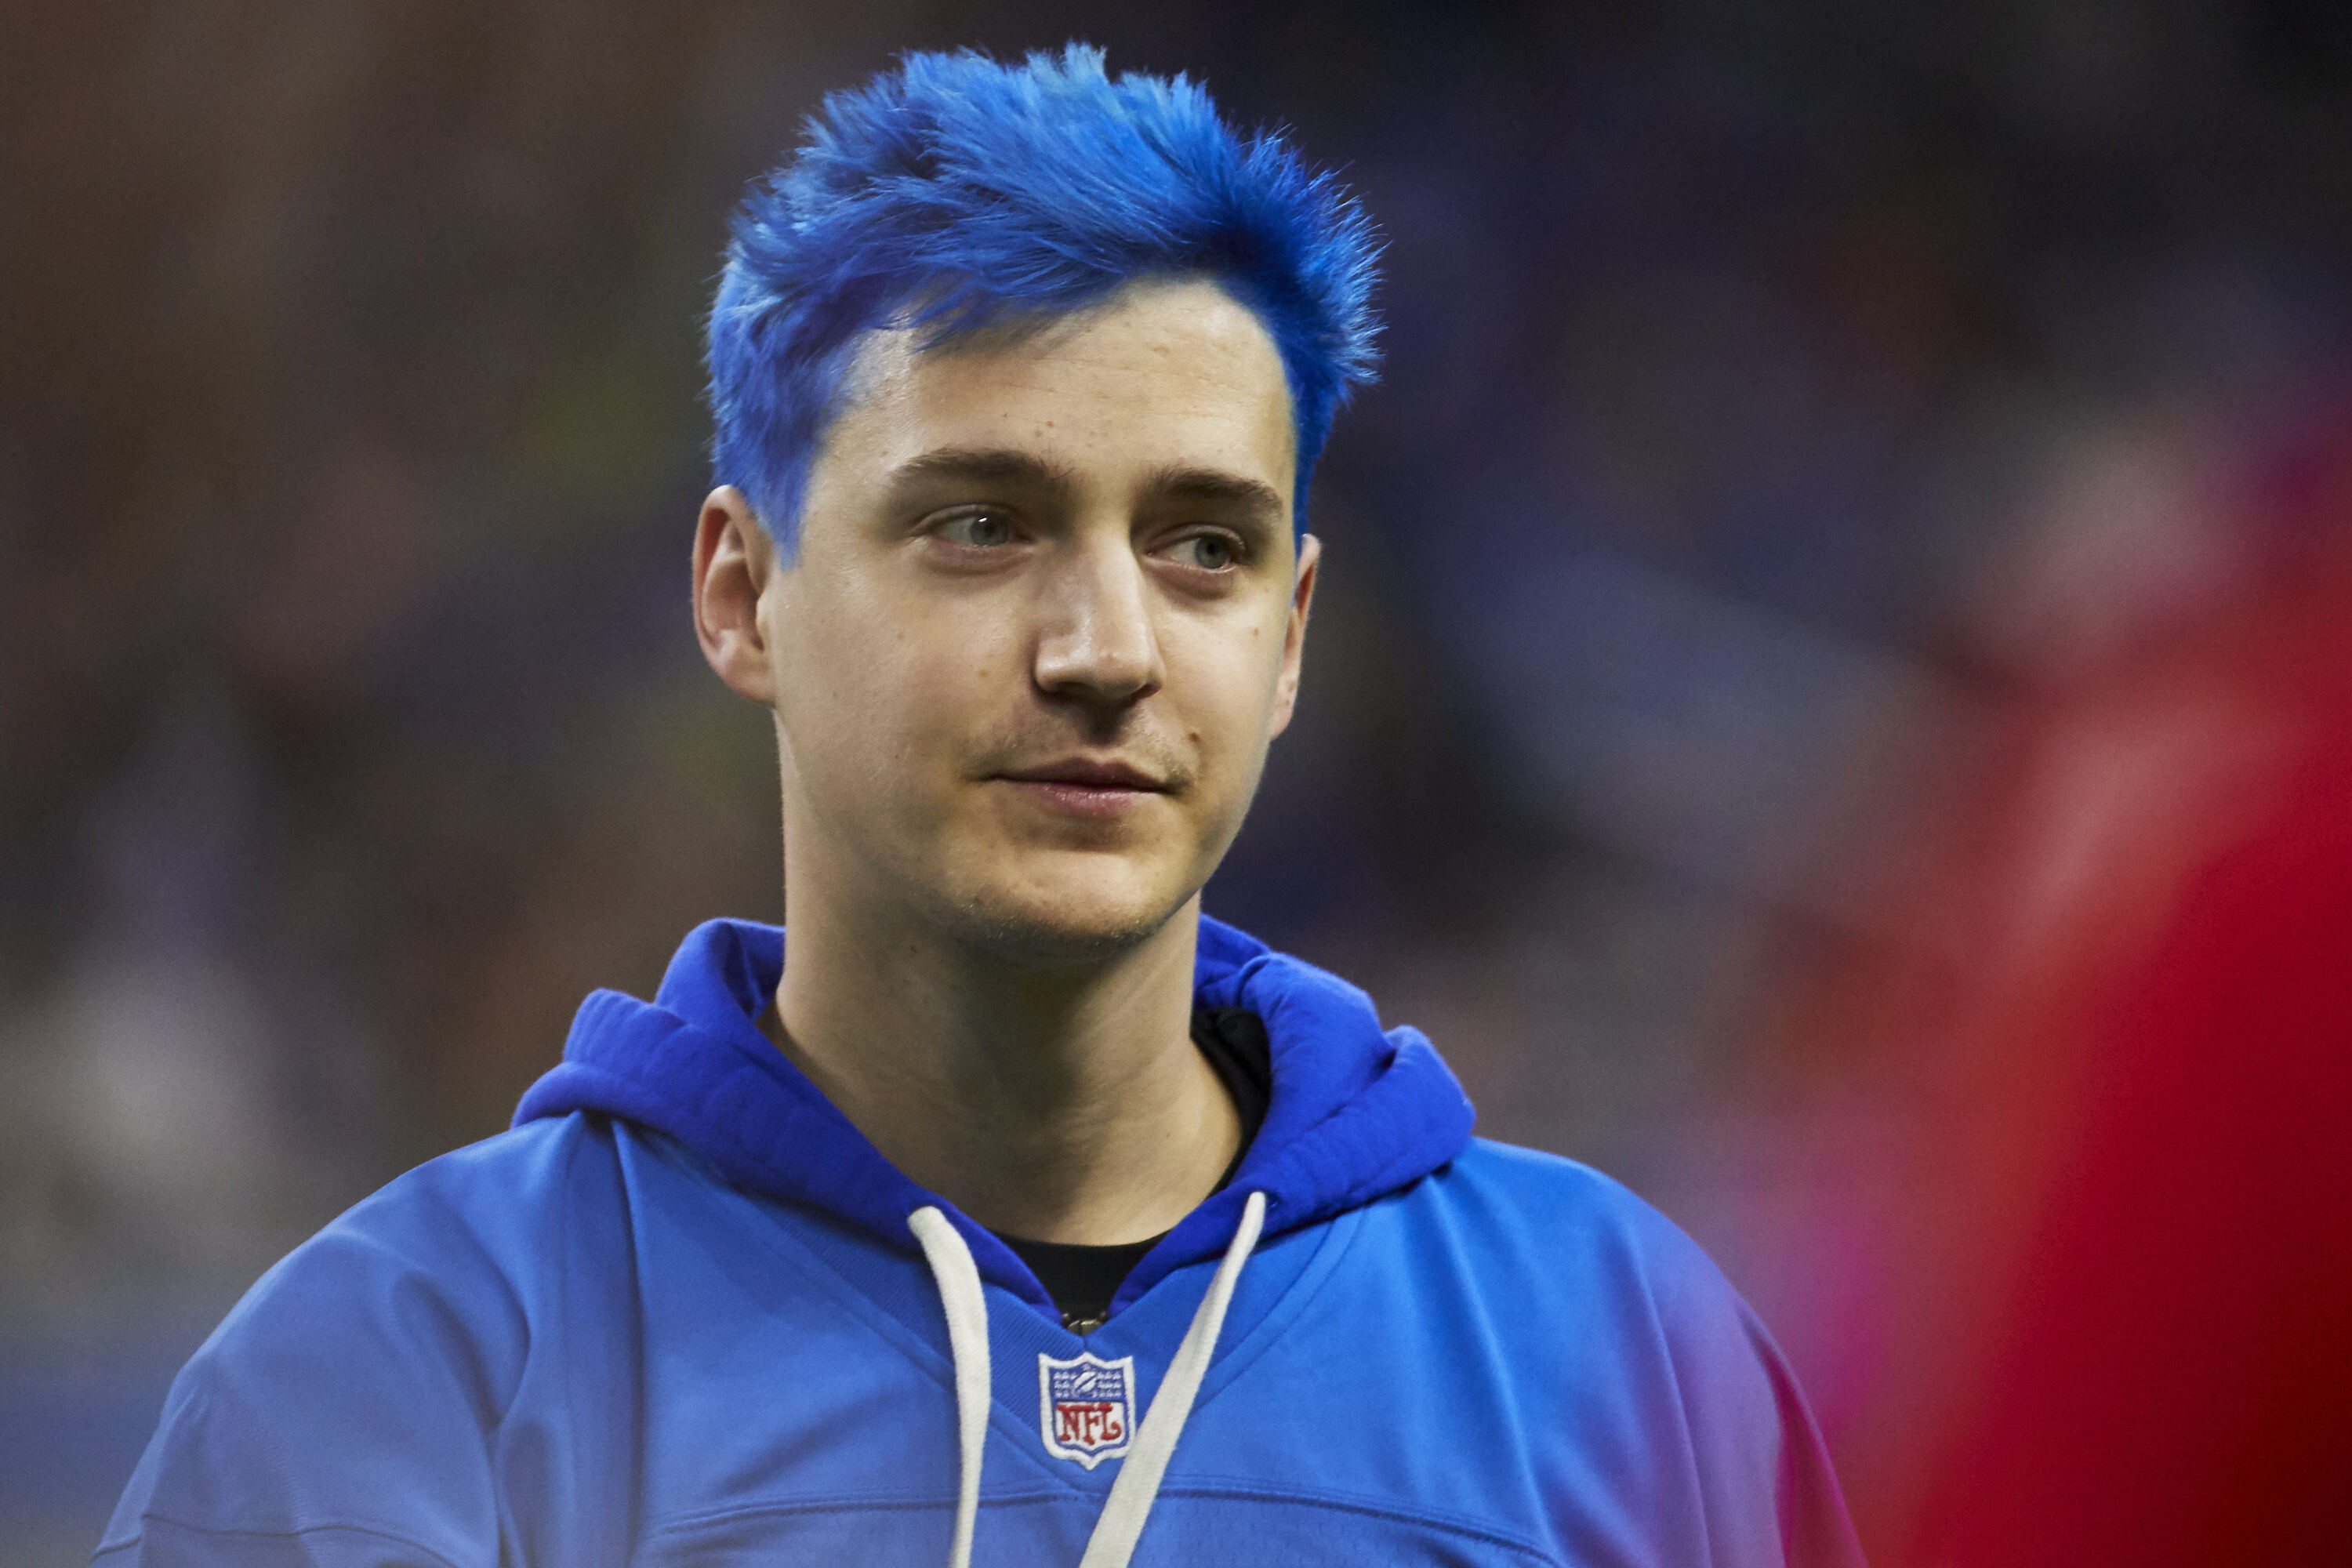 Fortnite Ninja's Mixer Contract Reportedly Worth $20M to $30M | Scores, Stats, and Rumors | Bleacher Report